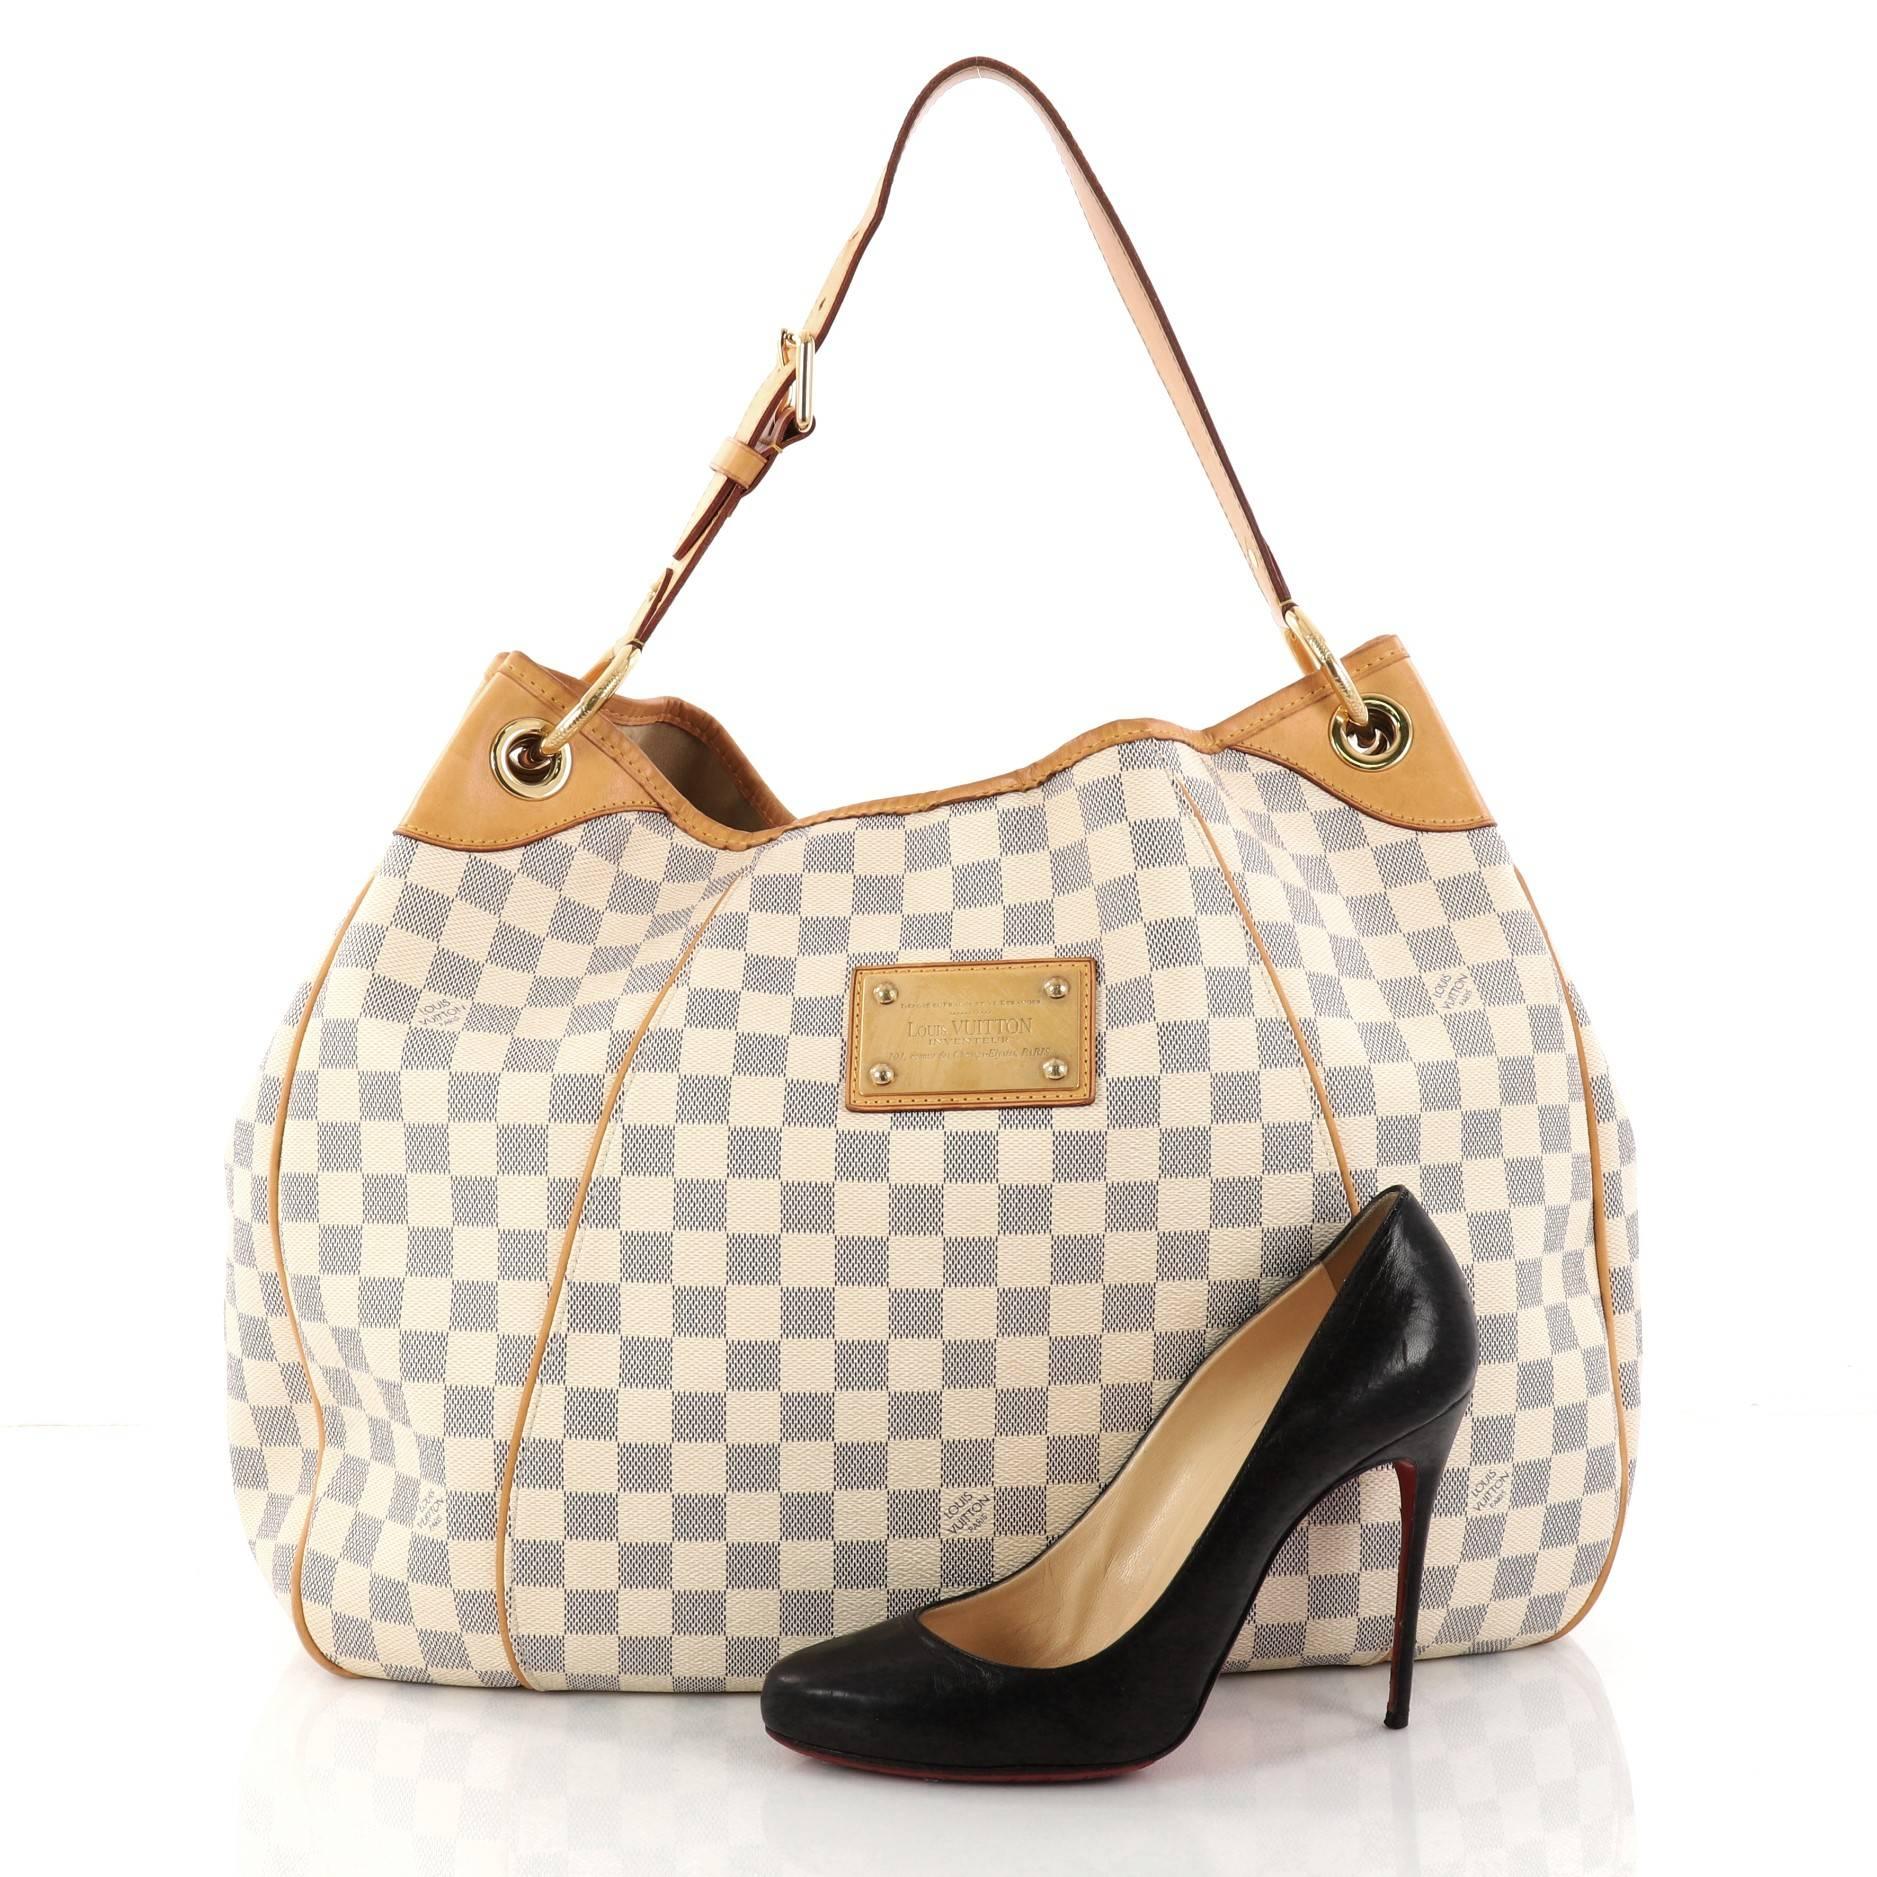 This authentic Louis Vuitton Galliera Handbag Damier GM is a bag as practical as it is iconic. Crafted from Louis Vuitton's popular damier azur coated canvas, this bag features adjustable shoulder strap, stand-out yellow contrast stitching, cowhide